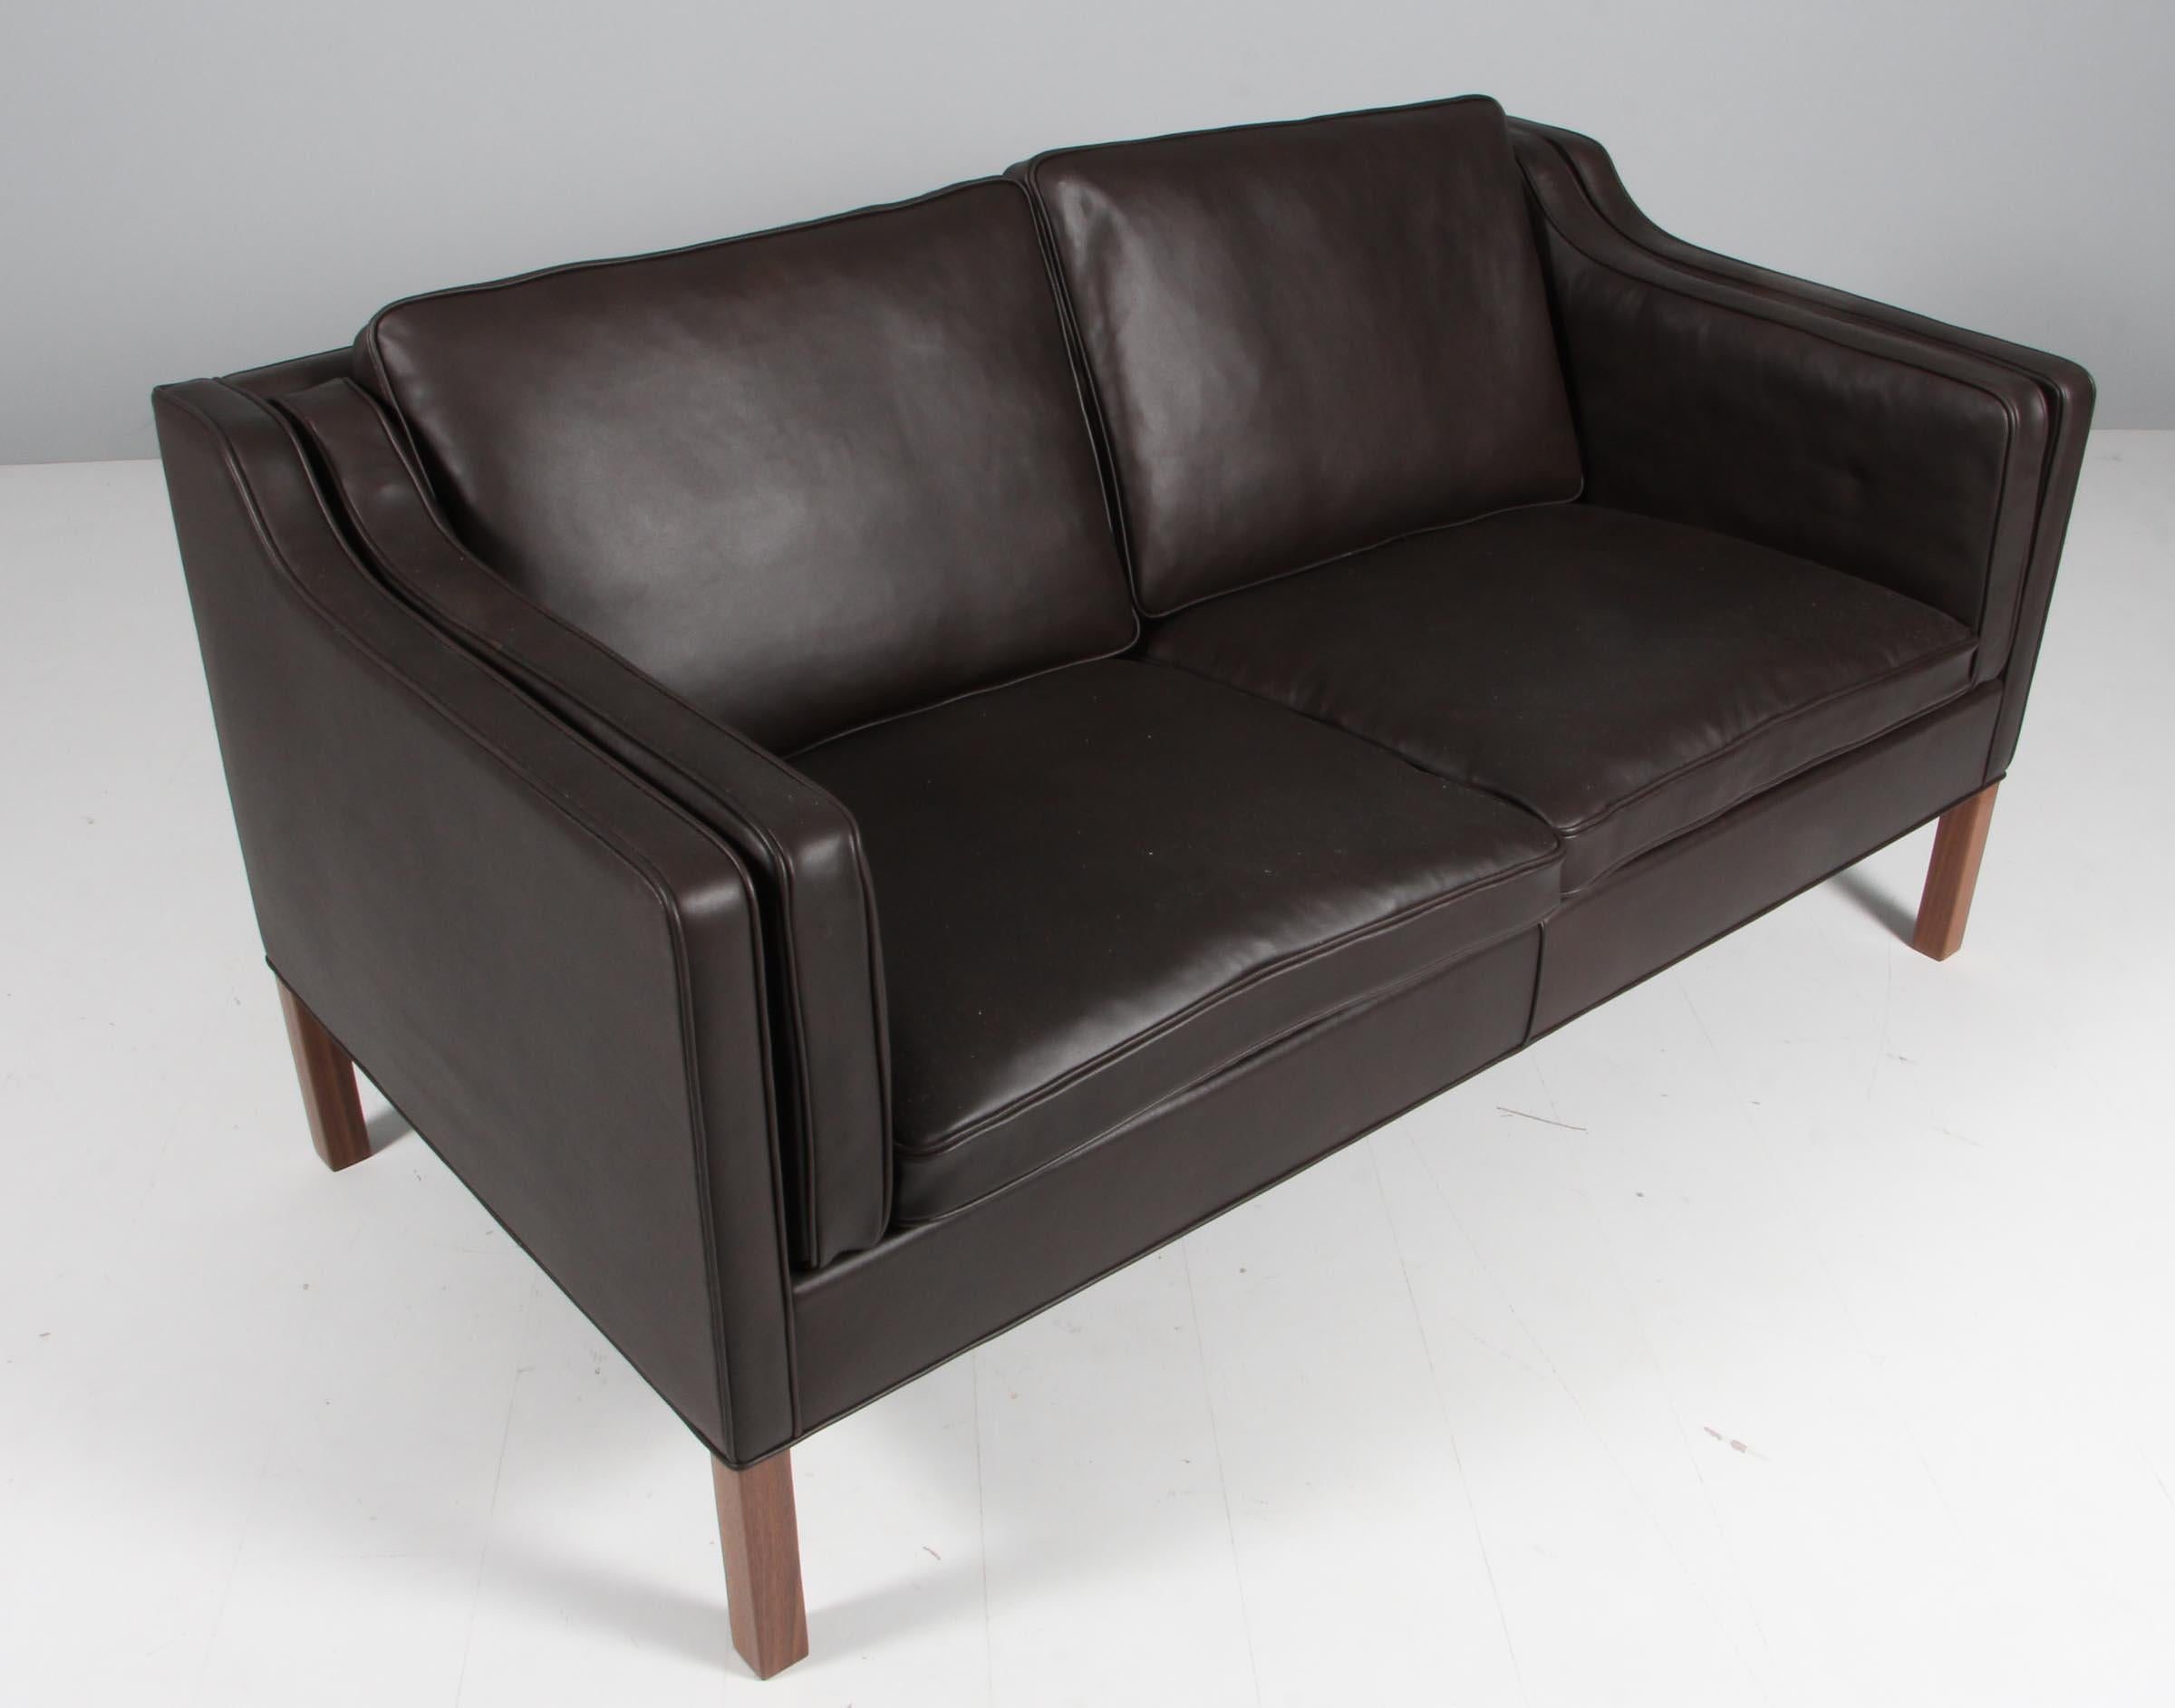 Børge Mogensen two-seat sofa new upholstered with mokka elegance aniline leather.

Legs of mahogany.

Model 2212, made by Fredericia Furniture.